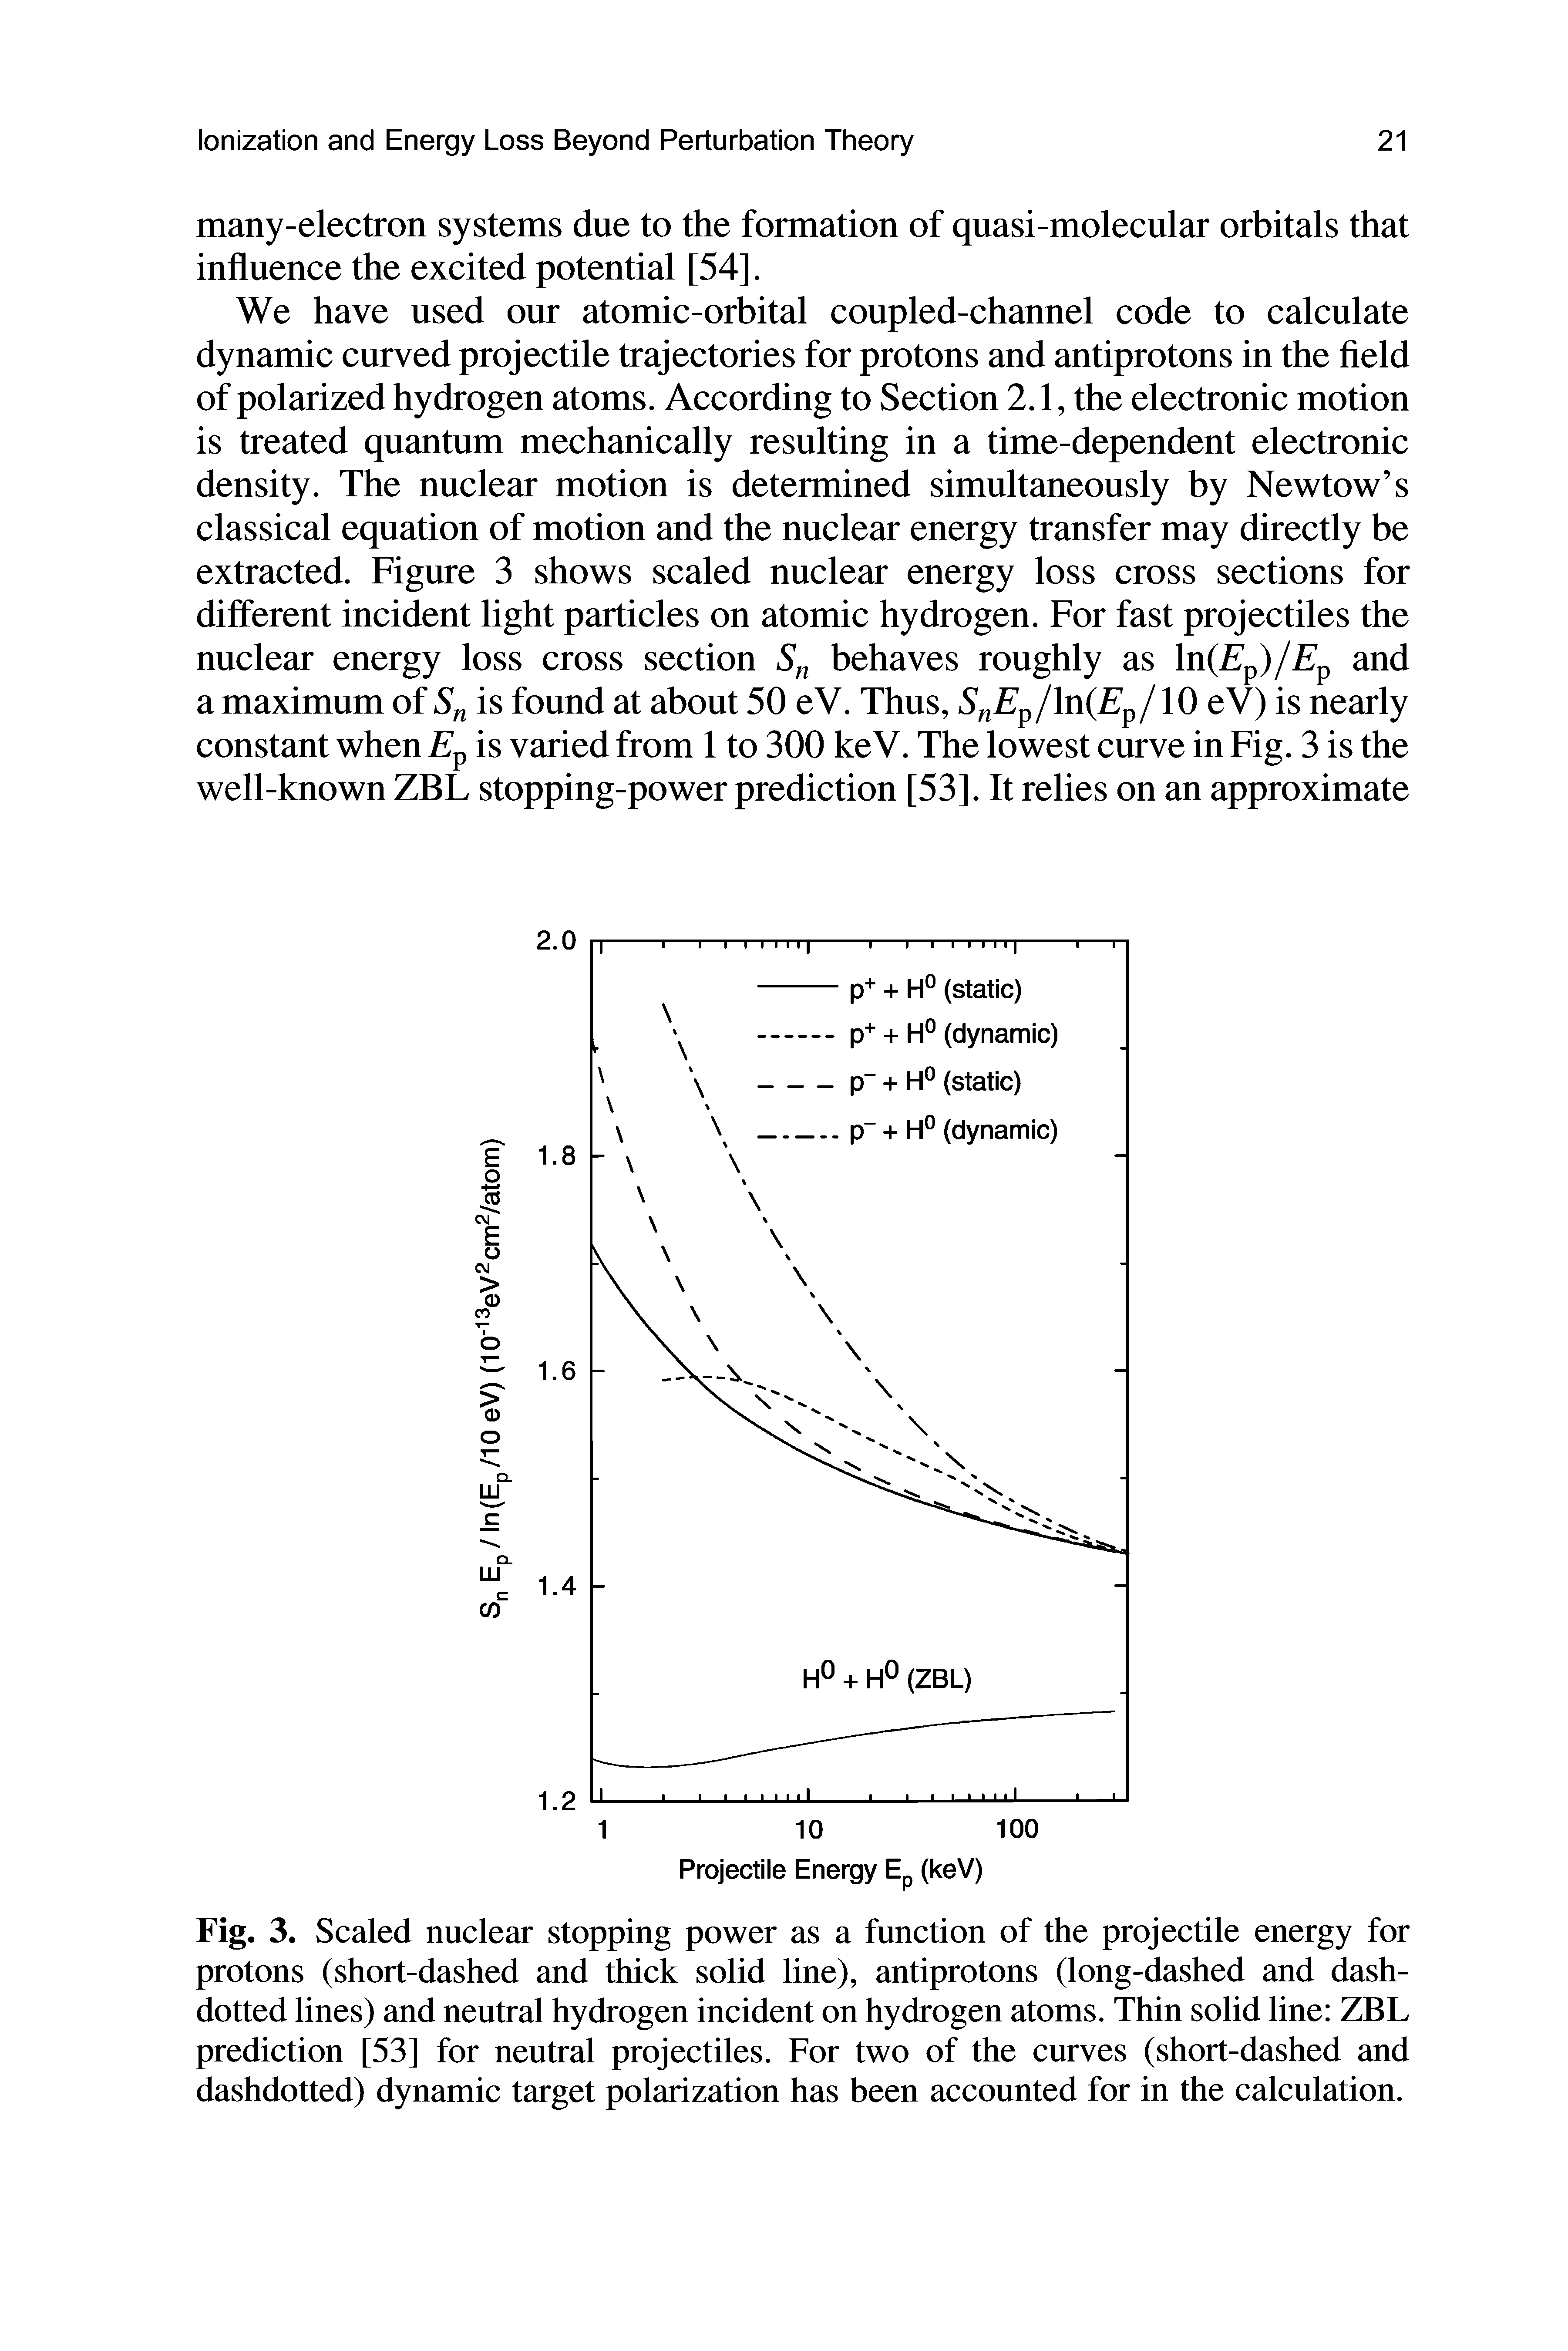 Fig. 3. Scaled nuclear stopping power as a function of the projectile energy for protons (short-dashed and thick solid line), antiprotons (long-dashed and dash-dotted lines) and neutral hydrogen incident on hydrogen atoms. Thin solid line ZBL prediction [53] for neutral projectiles. For two of the curves (short-dashed and dashdotted) dynamic target polarization has been accounted for in the calculation.